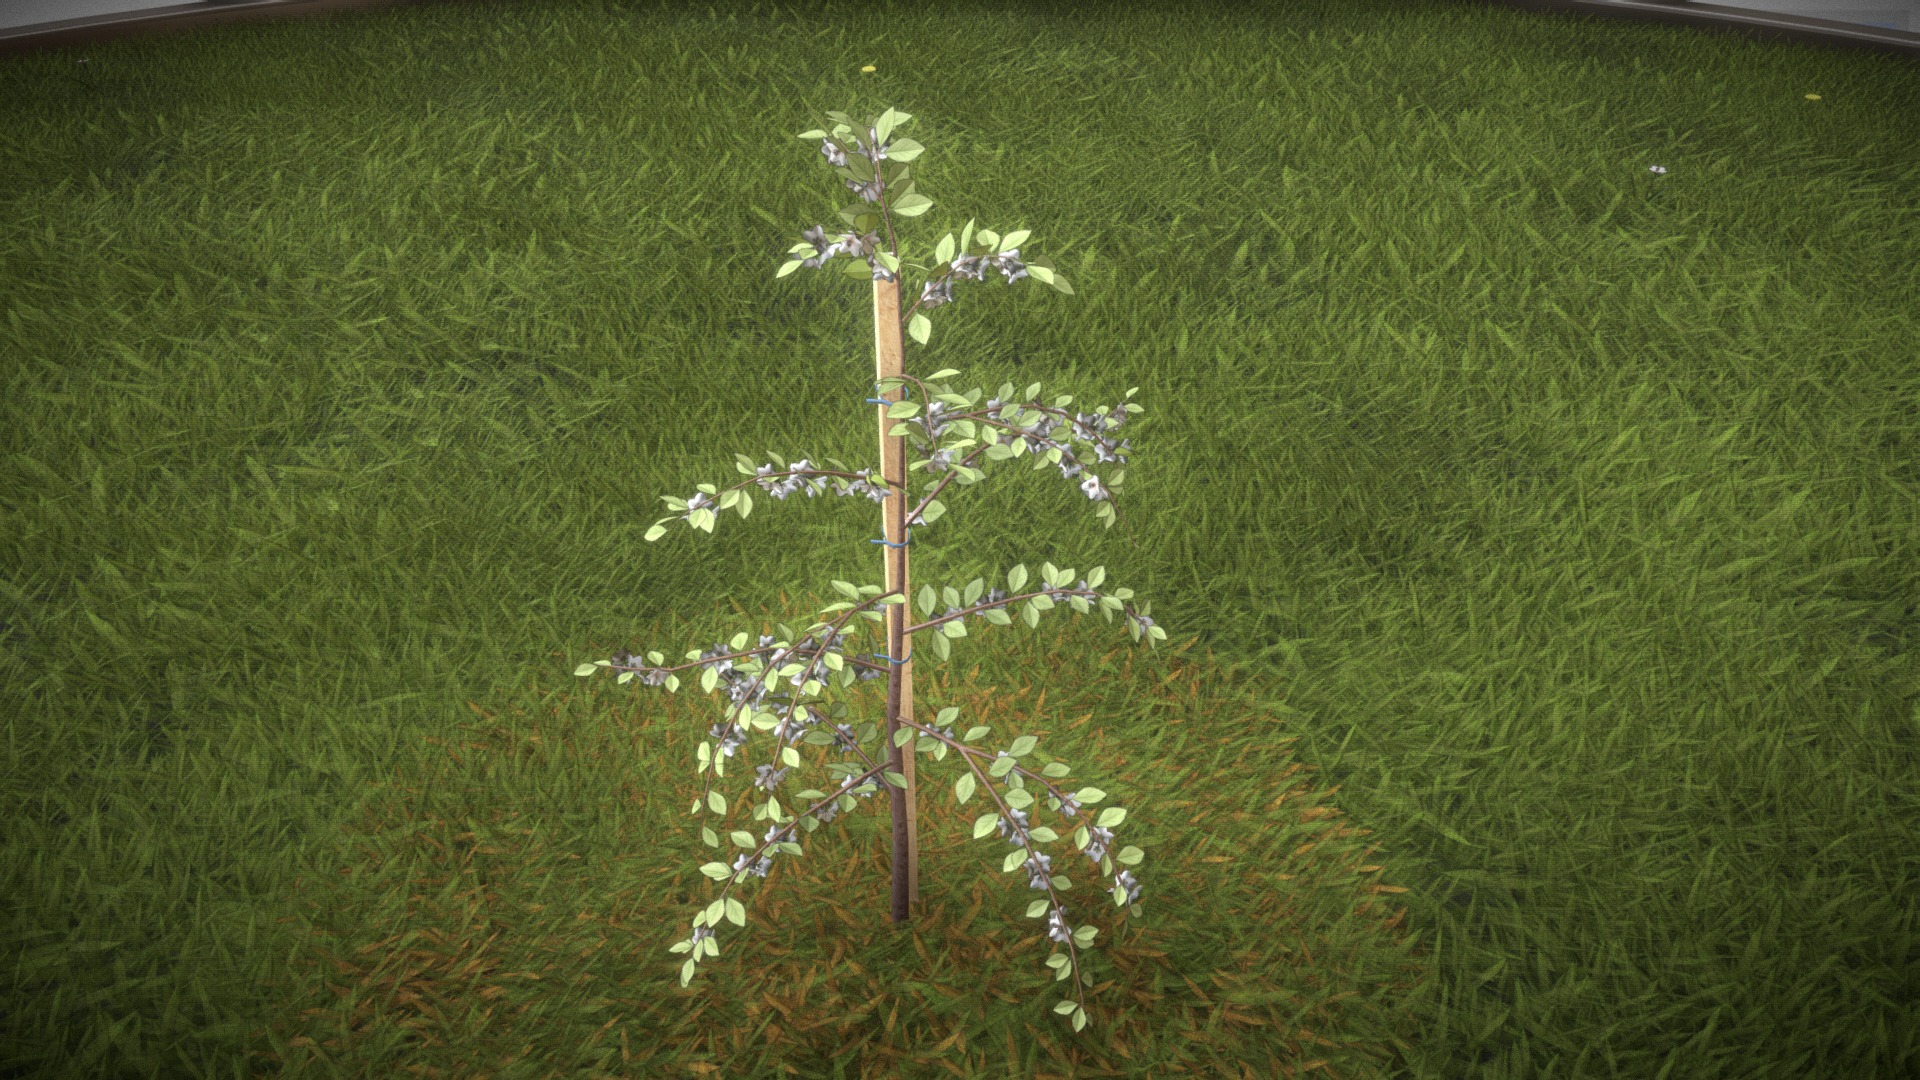 3D model Plum Tree 2m – Spring Season. - This is a 3D model of the Plum Tree 2m - Spring Season.. The 3D model is about a small tree in a grassy field.